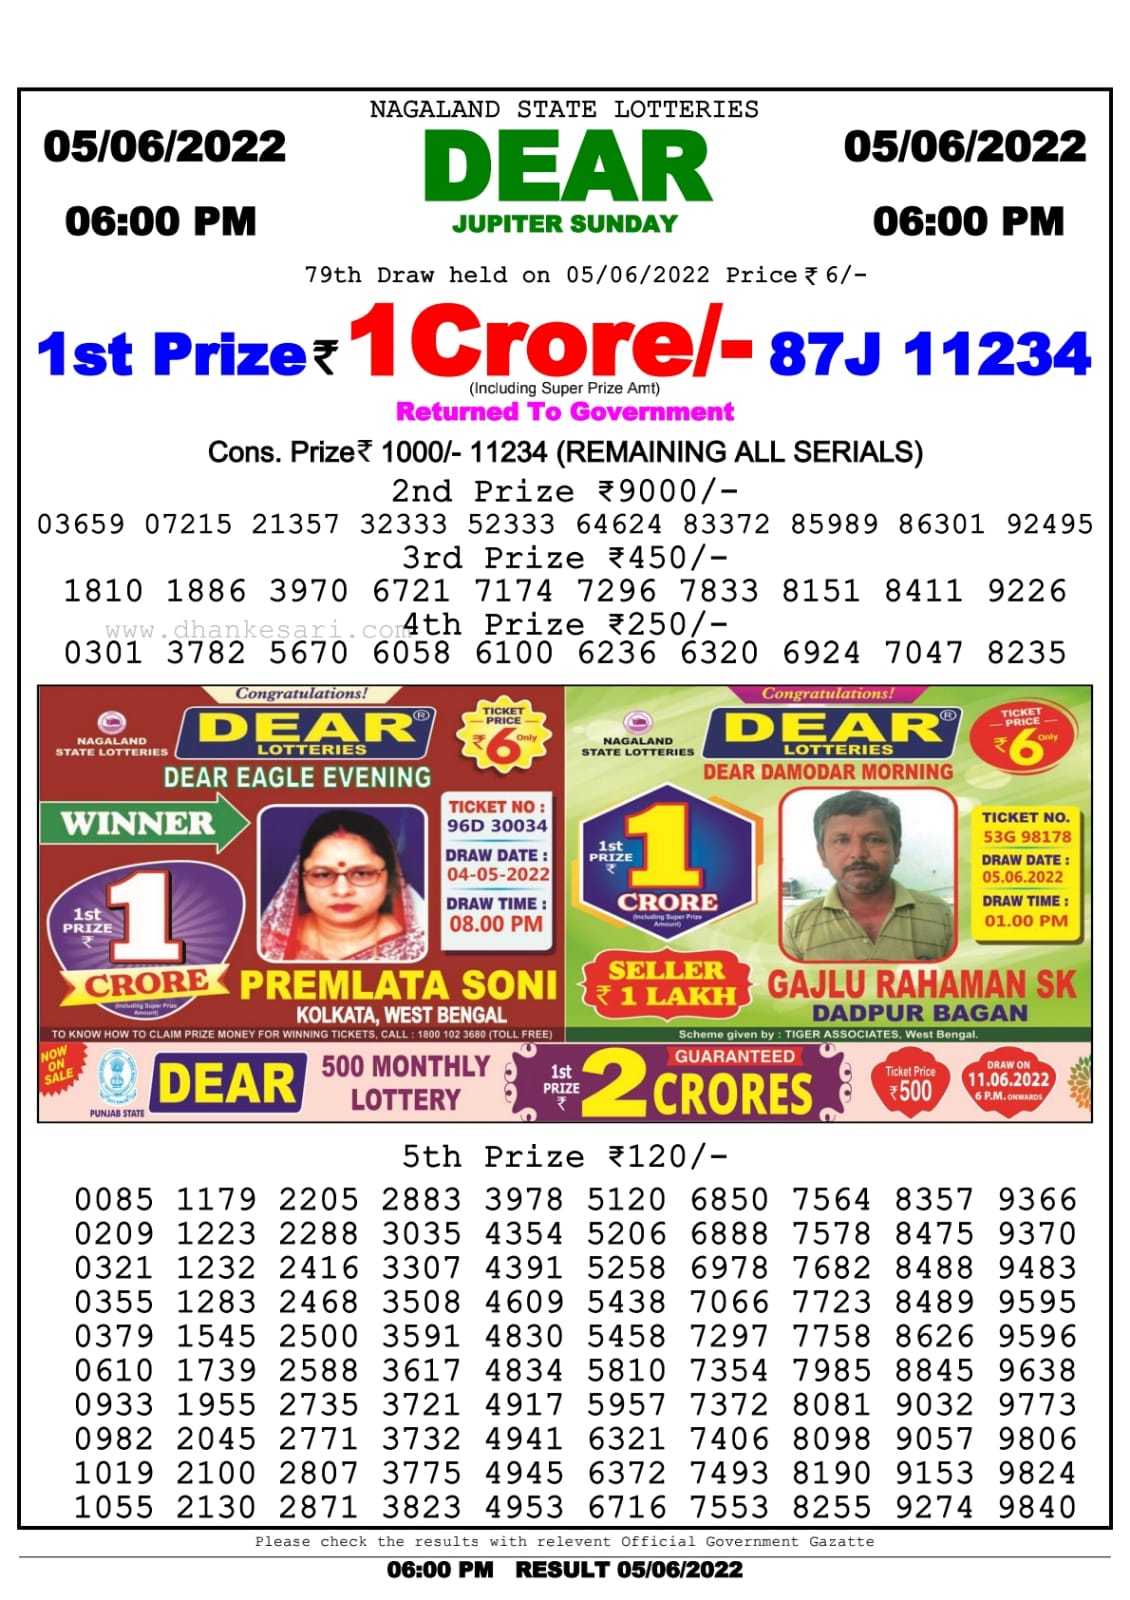 Dear Lottery Nagaland state Lottery Results 06.00 pm 05.06.2022